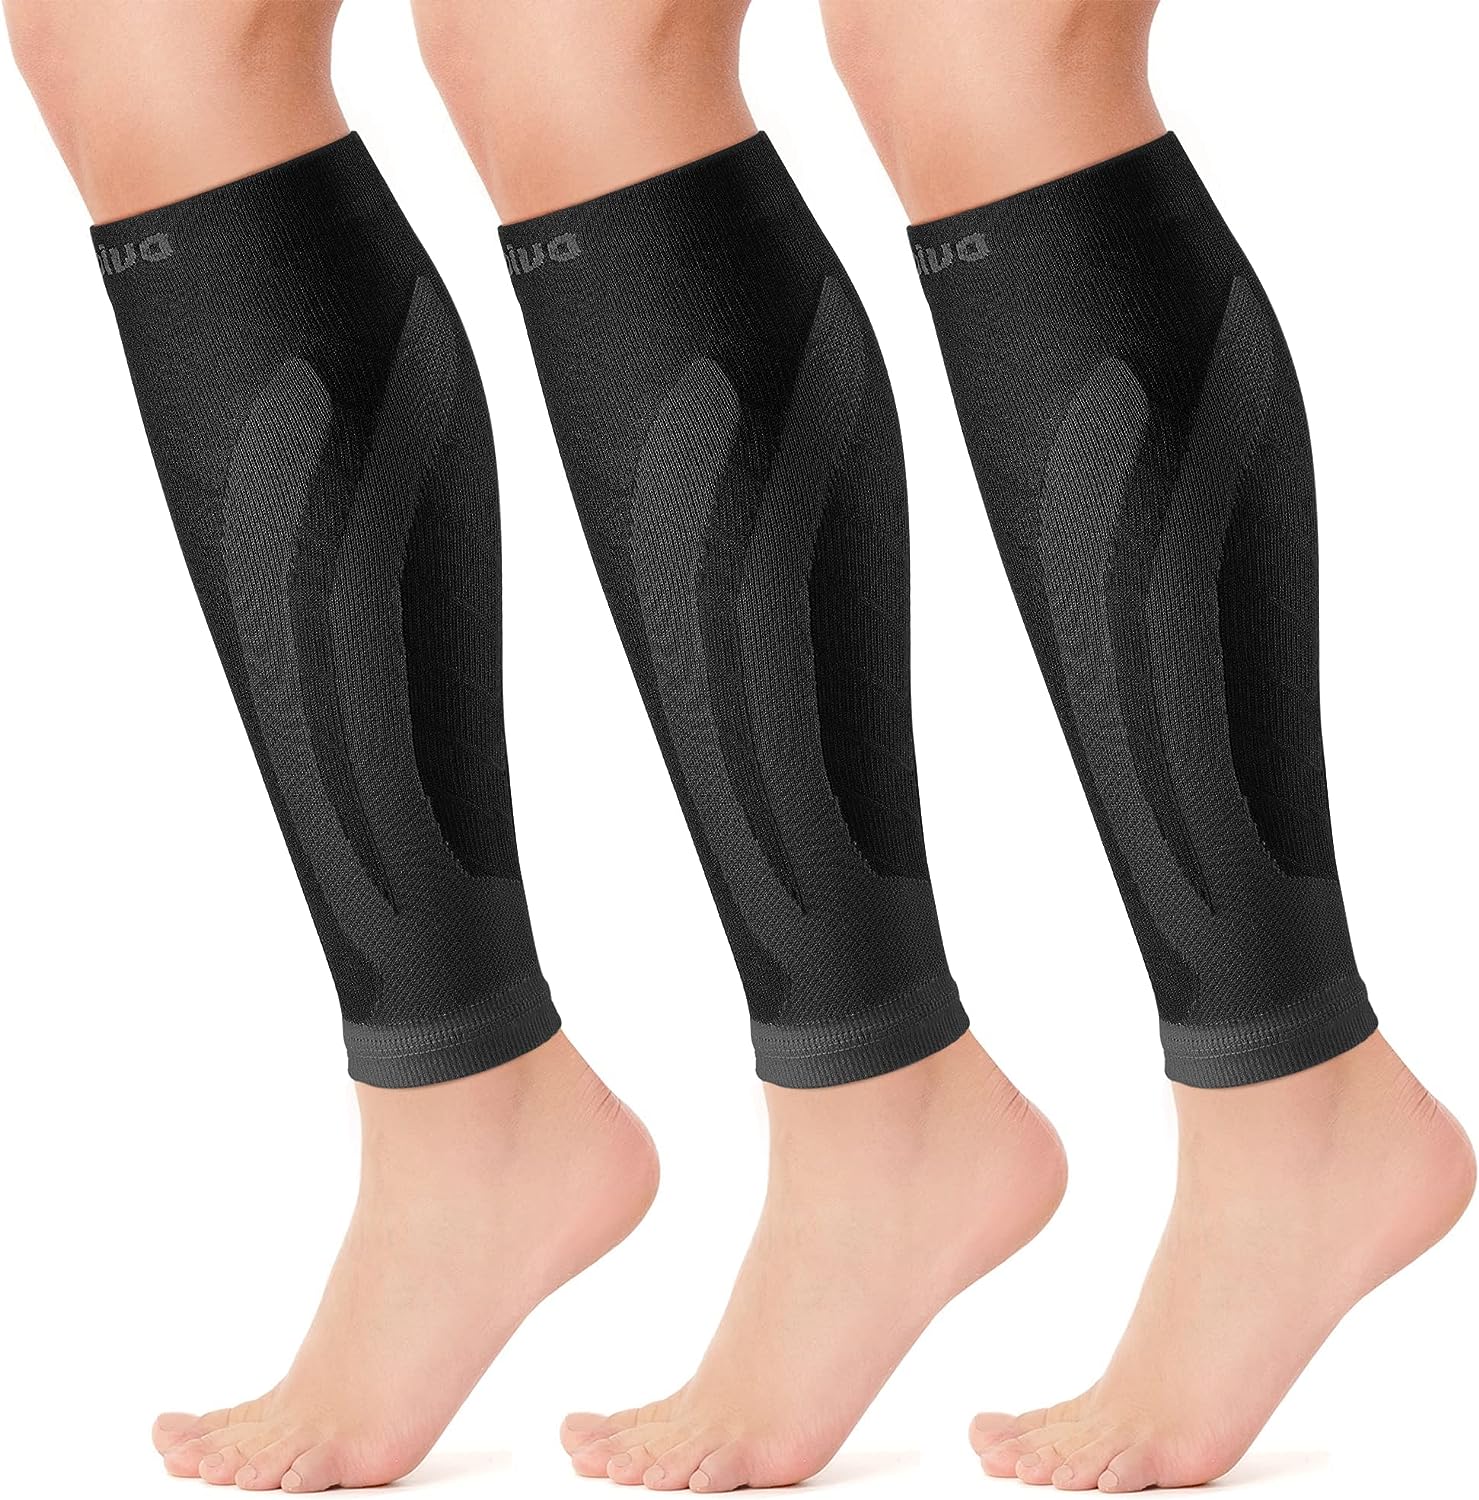 Chivao 2 Pairs Calf Brace Adjustable Shin Splint Support Lower Leg  Compression Wrap Calf Sleeves for Men Women Pain Relief, Increases  Circulation